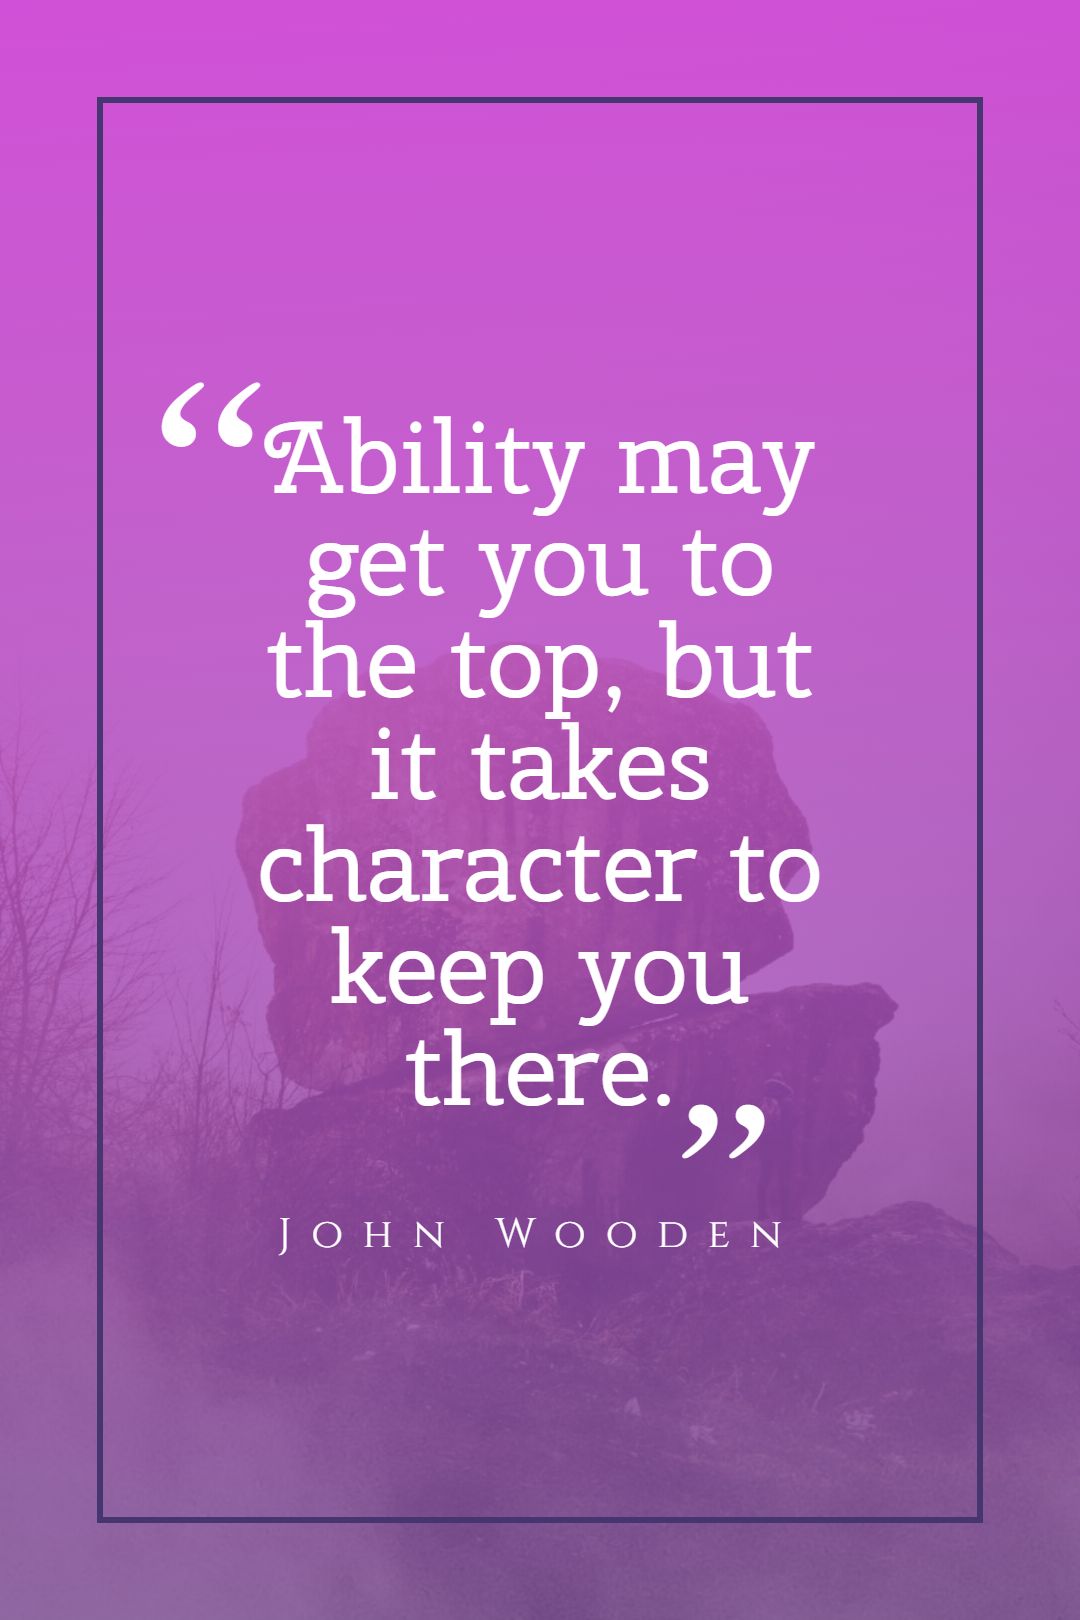 Ability may get you to the top but it takes character to keep you there.